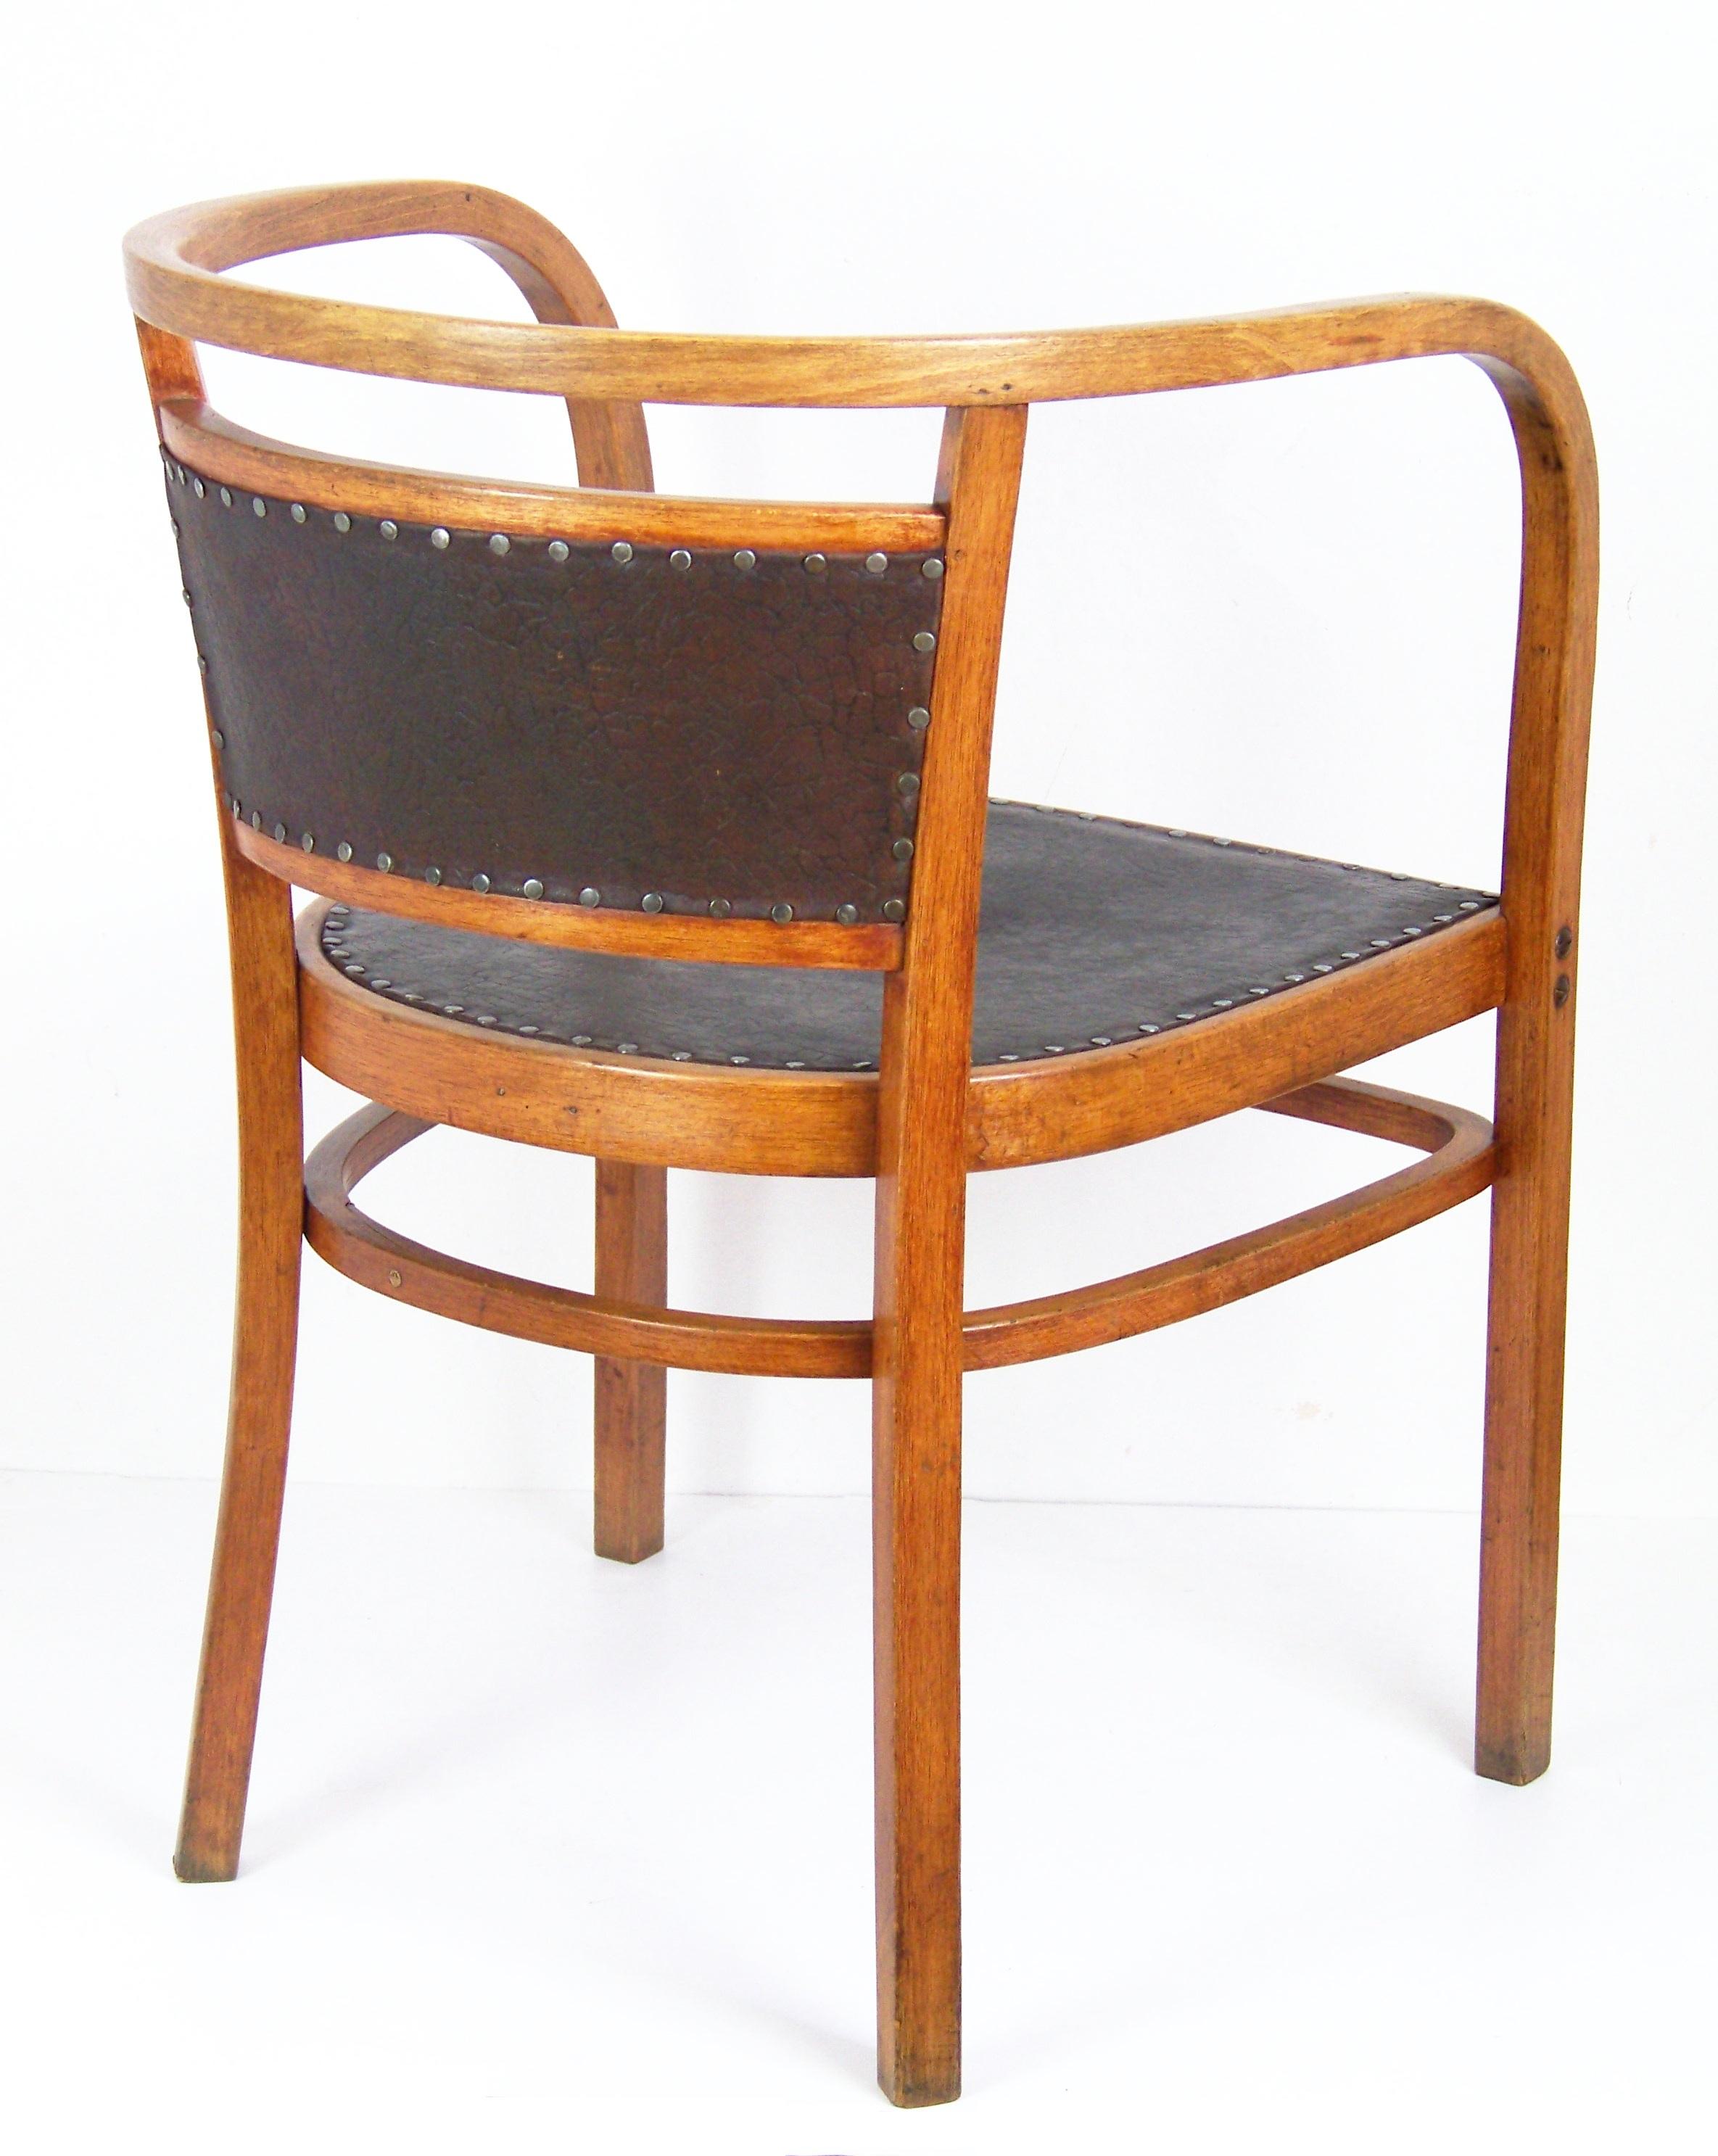 Bentwood Armchair Thonet Nr.6526 by Otto Wagner, 1902-1918